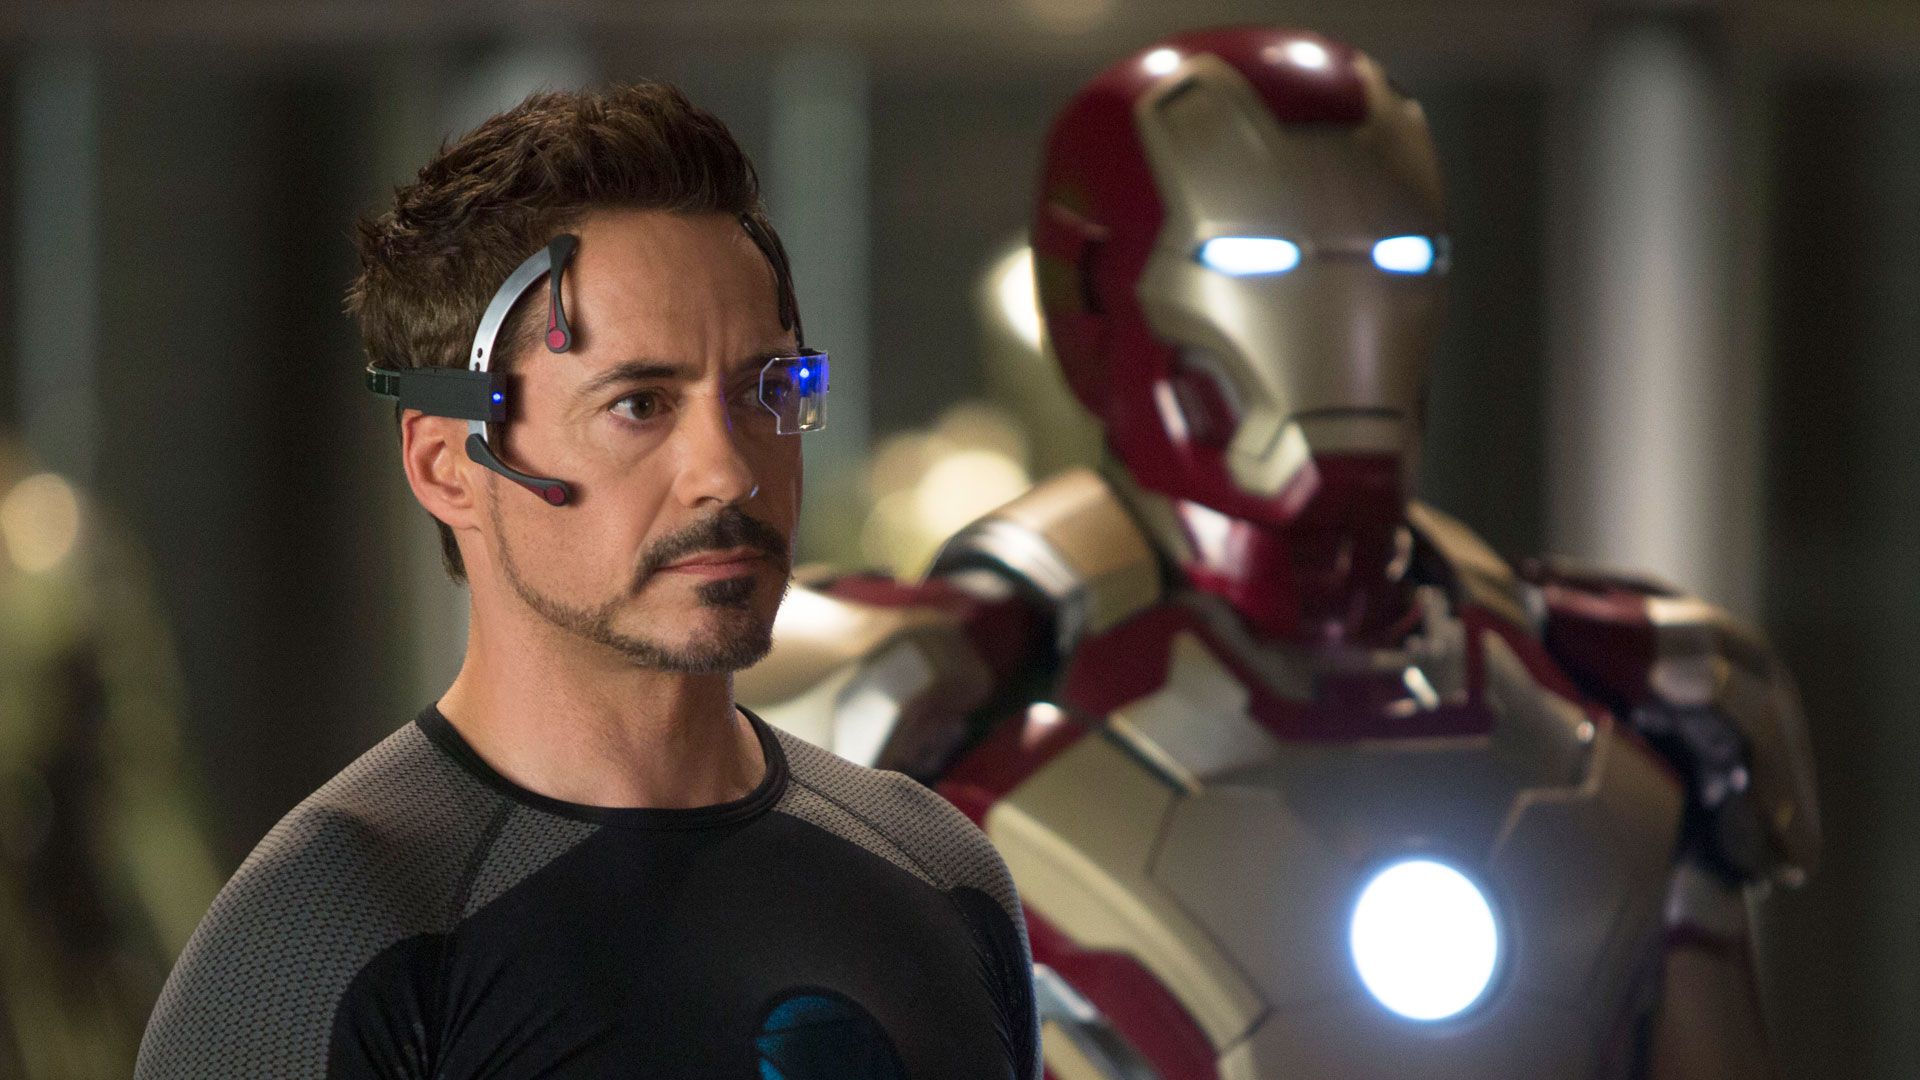 10 years on, Iron Man 3 remains Marvel's most overlooked movie